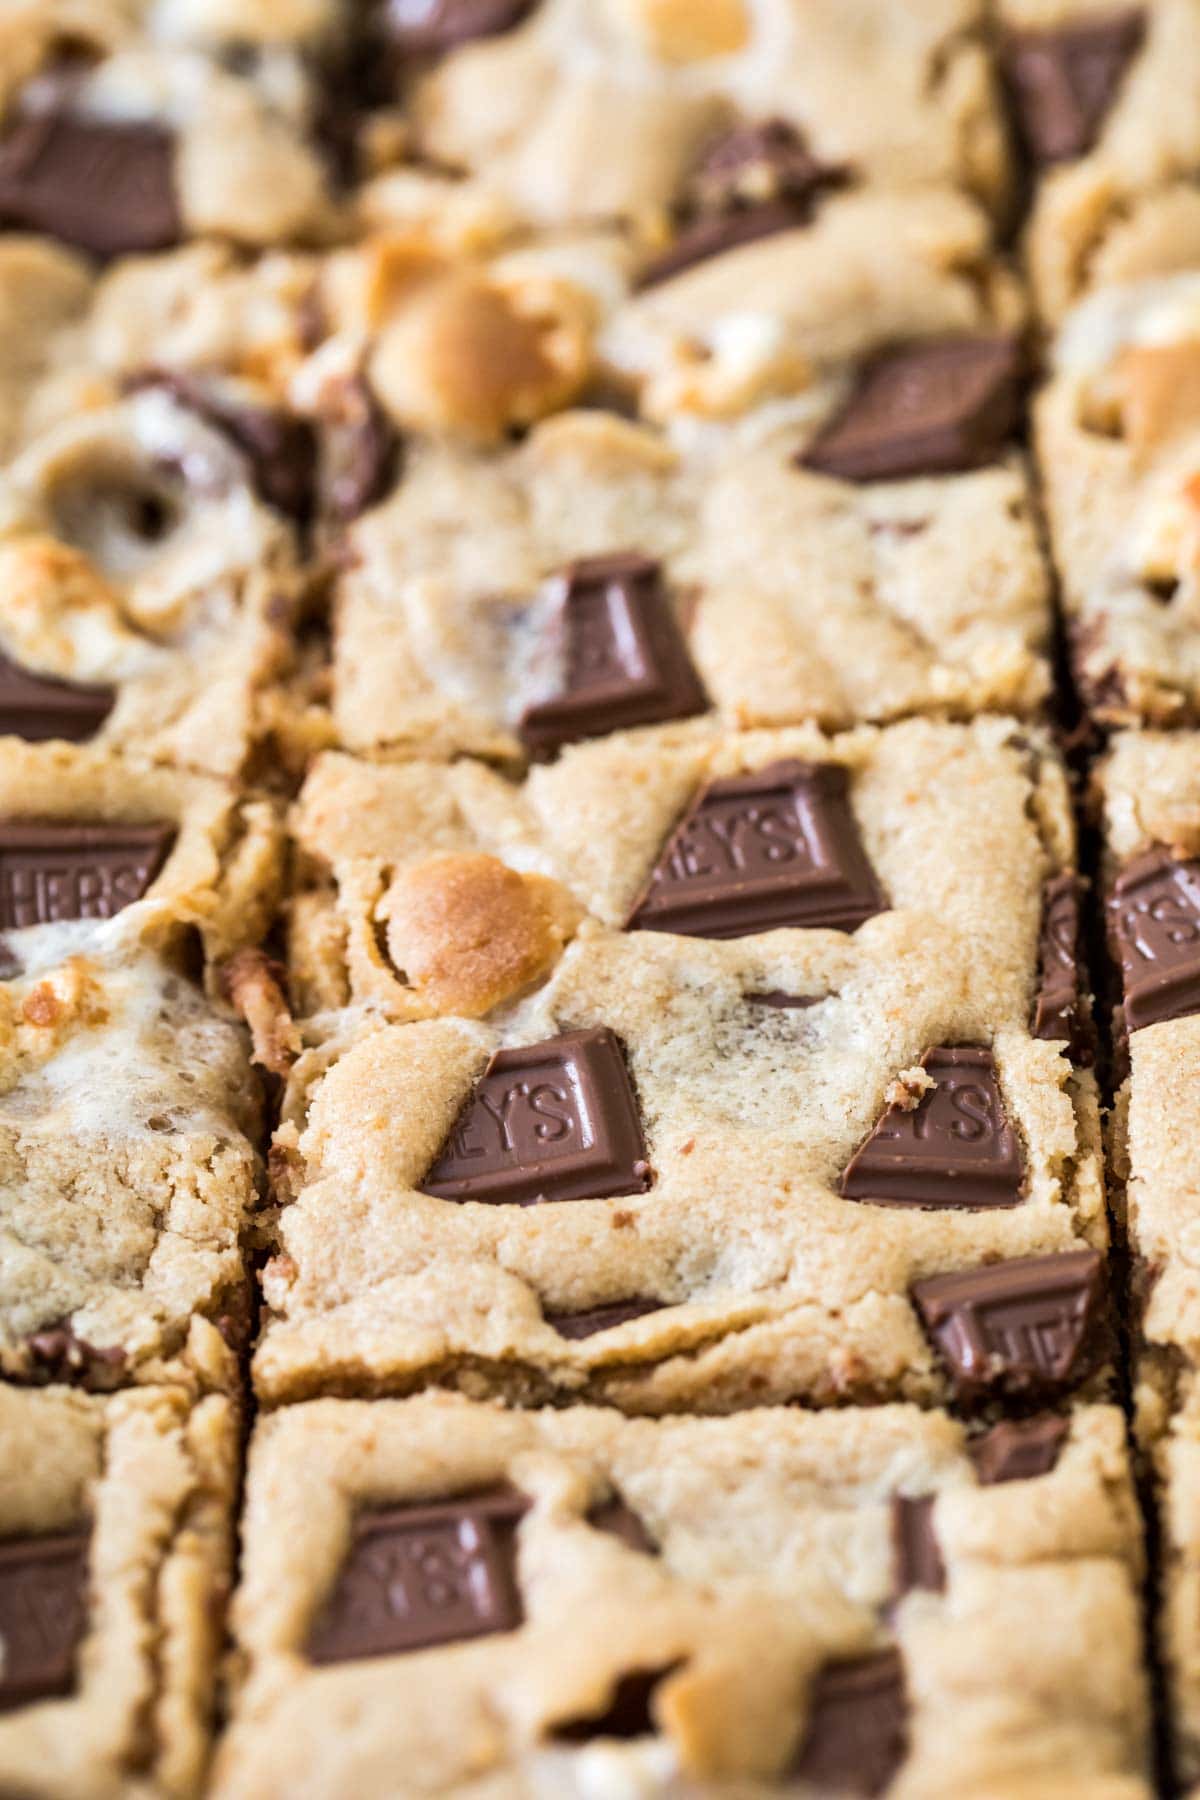 Close-up view of peanut butter s'mores bars just after being cut.